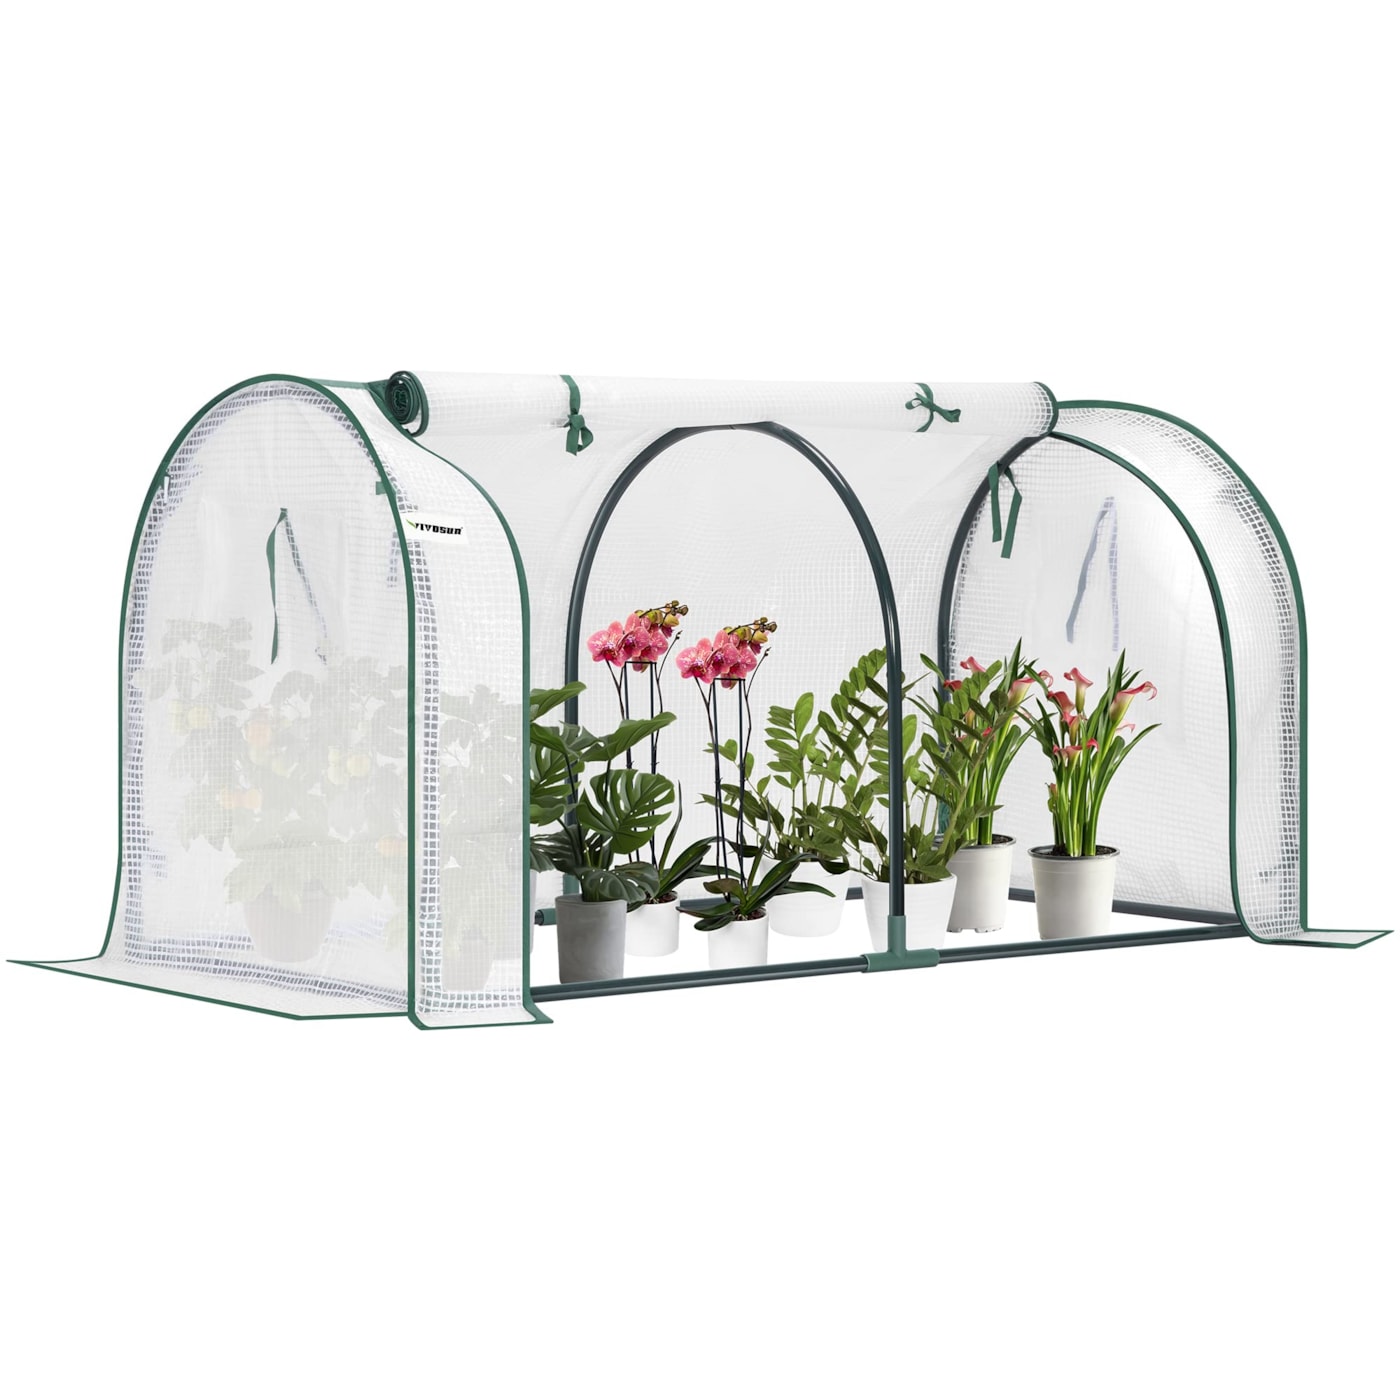 VIVOSUN Portable Mini Green House 47x23x23-Inch Tunnels, PE Cover with Roll-up Zipper Door, for Indoor Outdoor or Garden Planting